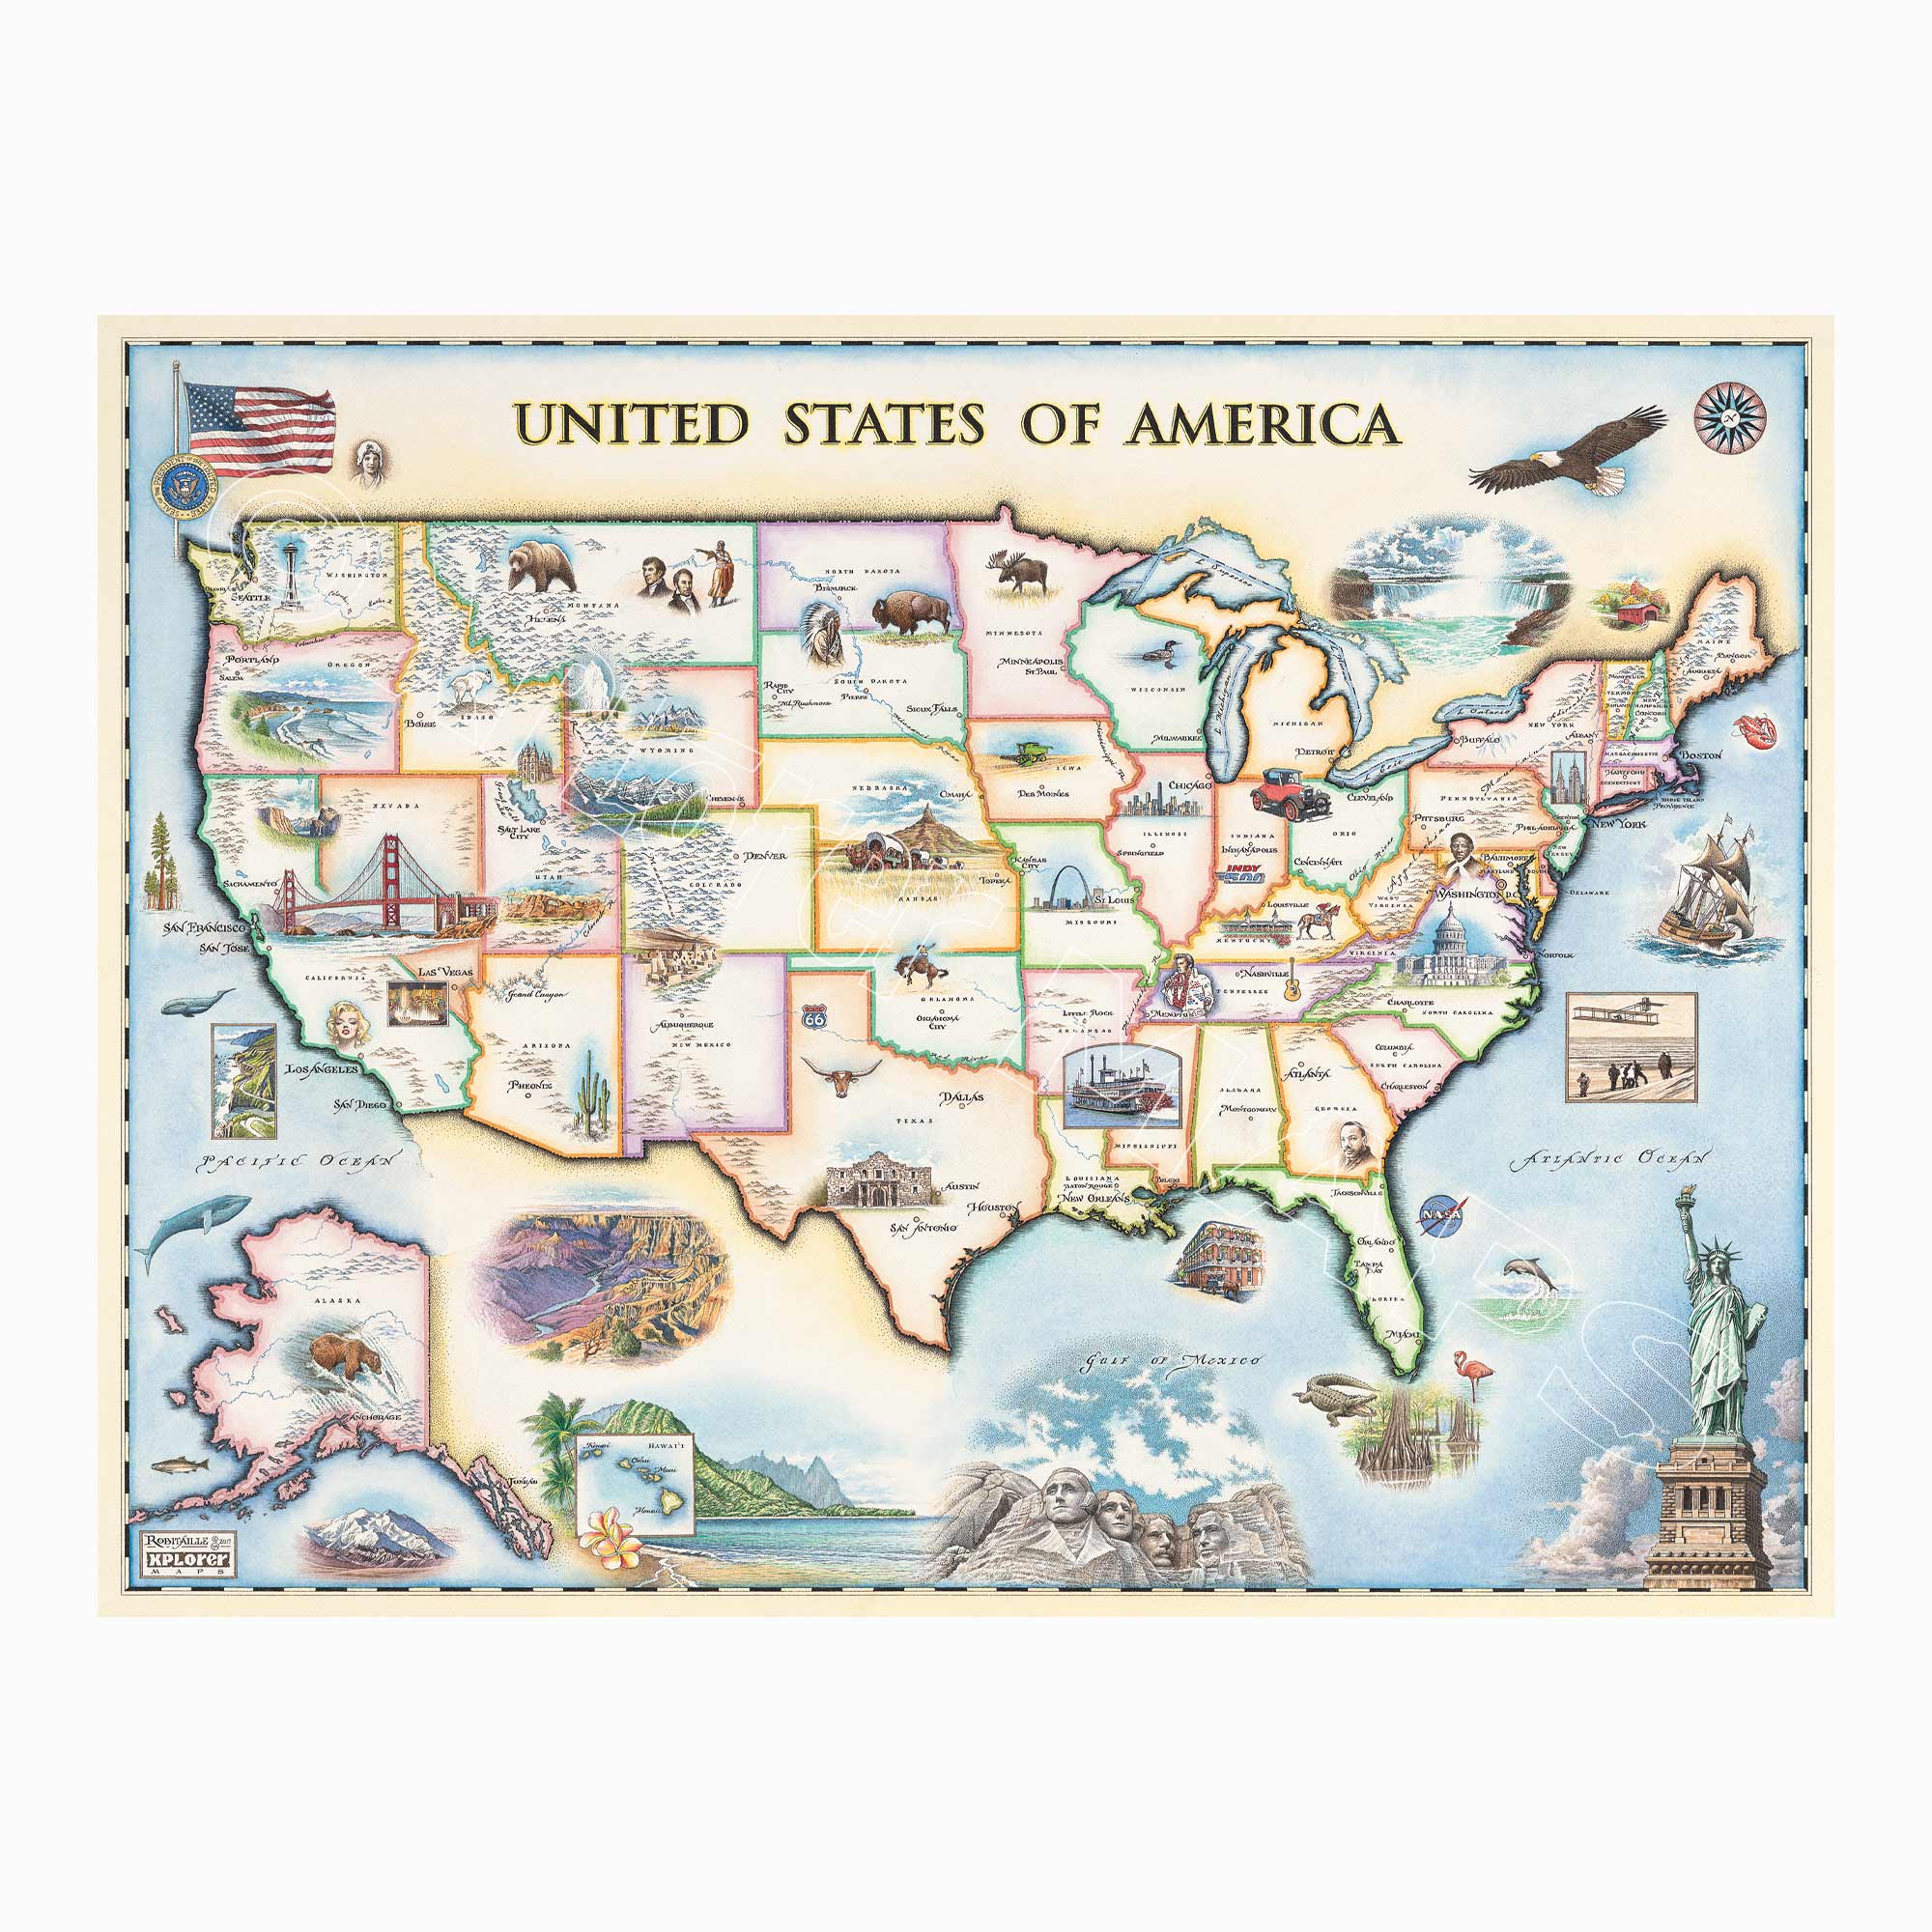 USA hand-drawn map in blue, beige, pink, and purple. The map features illustrations of significance from each state in the United States of America. Including a bald eagle, Elvis, bison, the Golden Gate bridge, the Space Needle, Niagara Falls, and the Alamo. Measures 24x18.